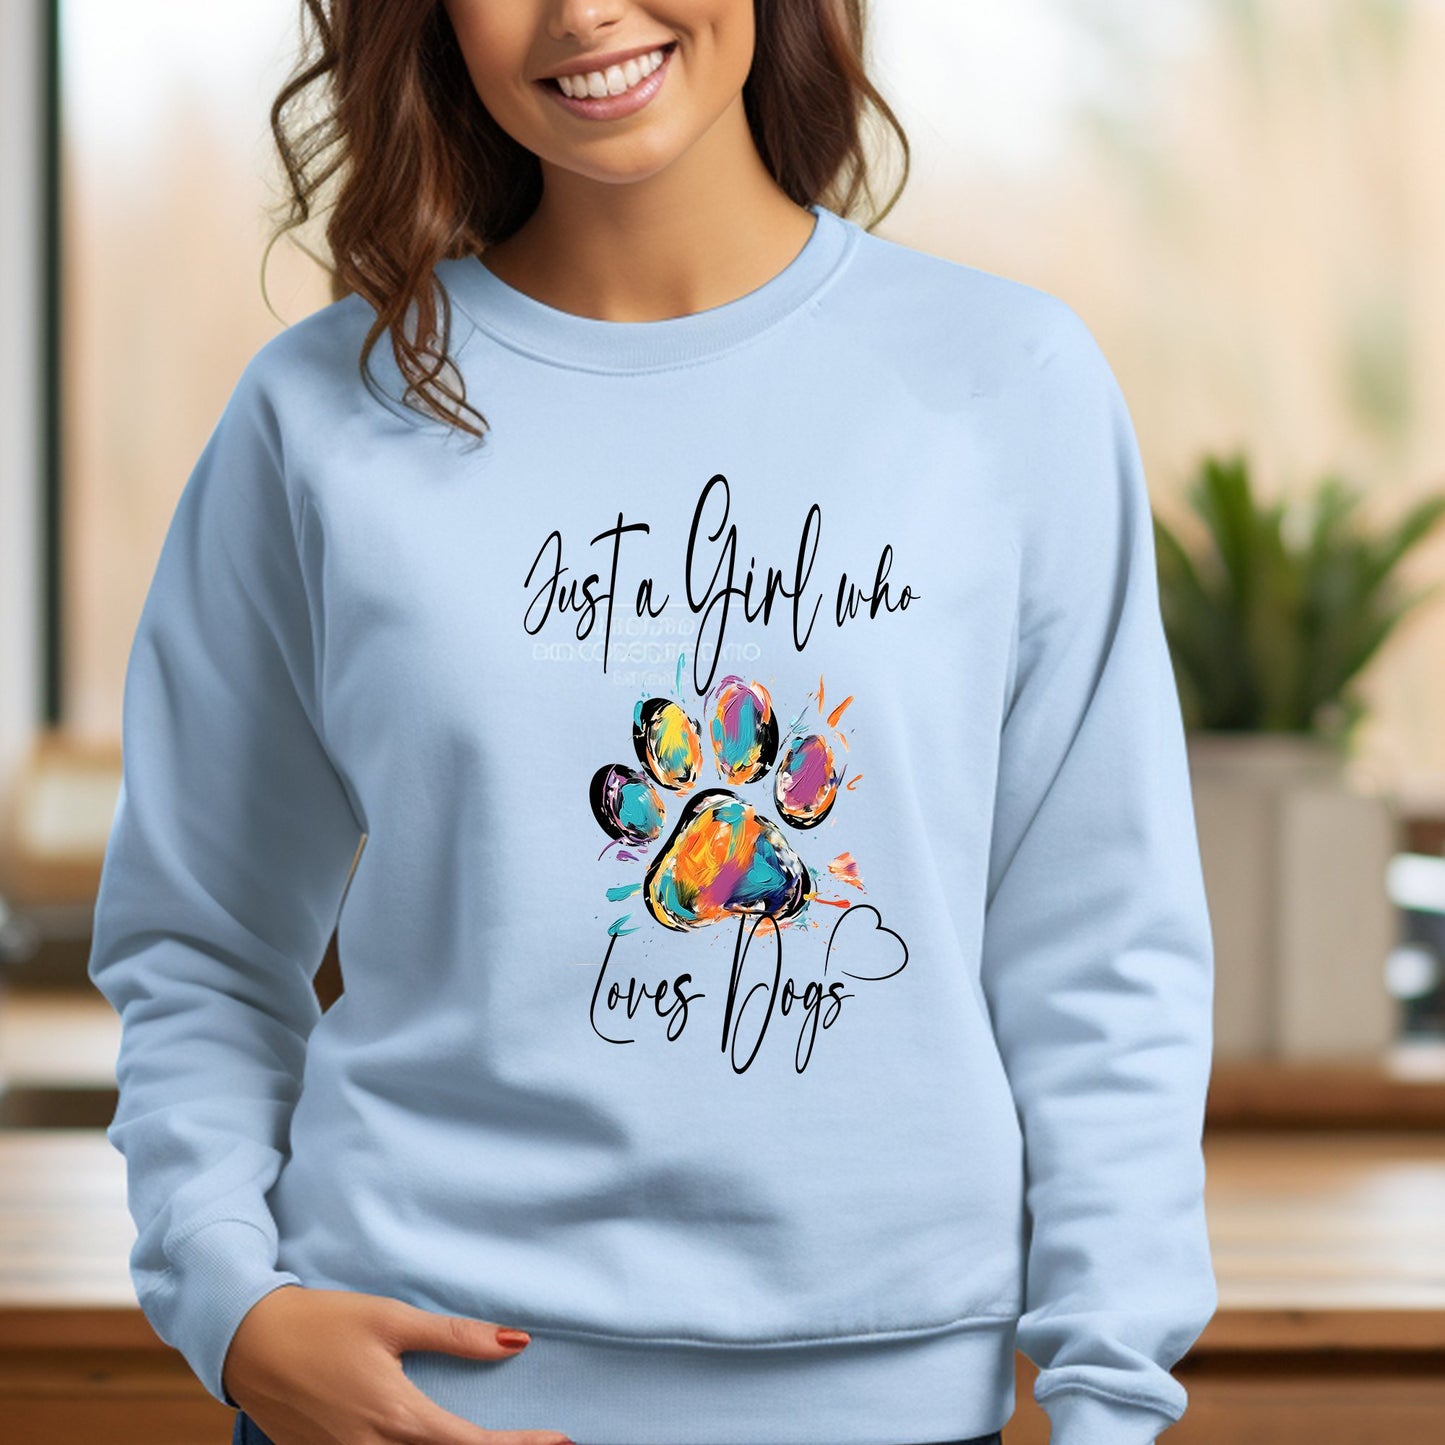 Dog Sweatshirt, Just A Girl Who Loves Dogs Sweater For a Dog Lover - FlooredByArt